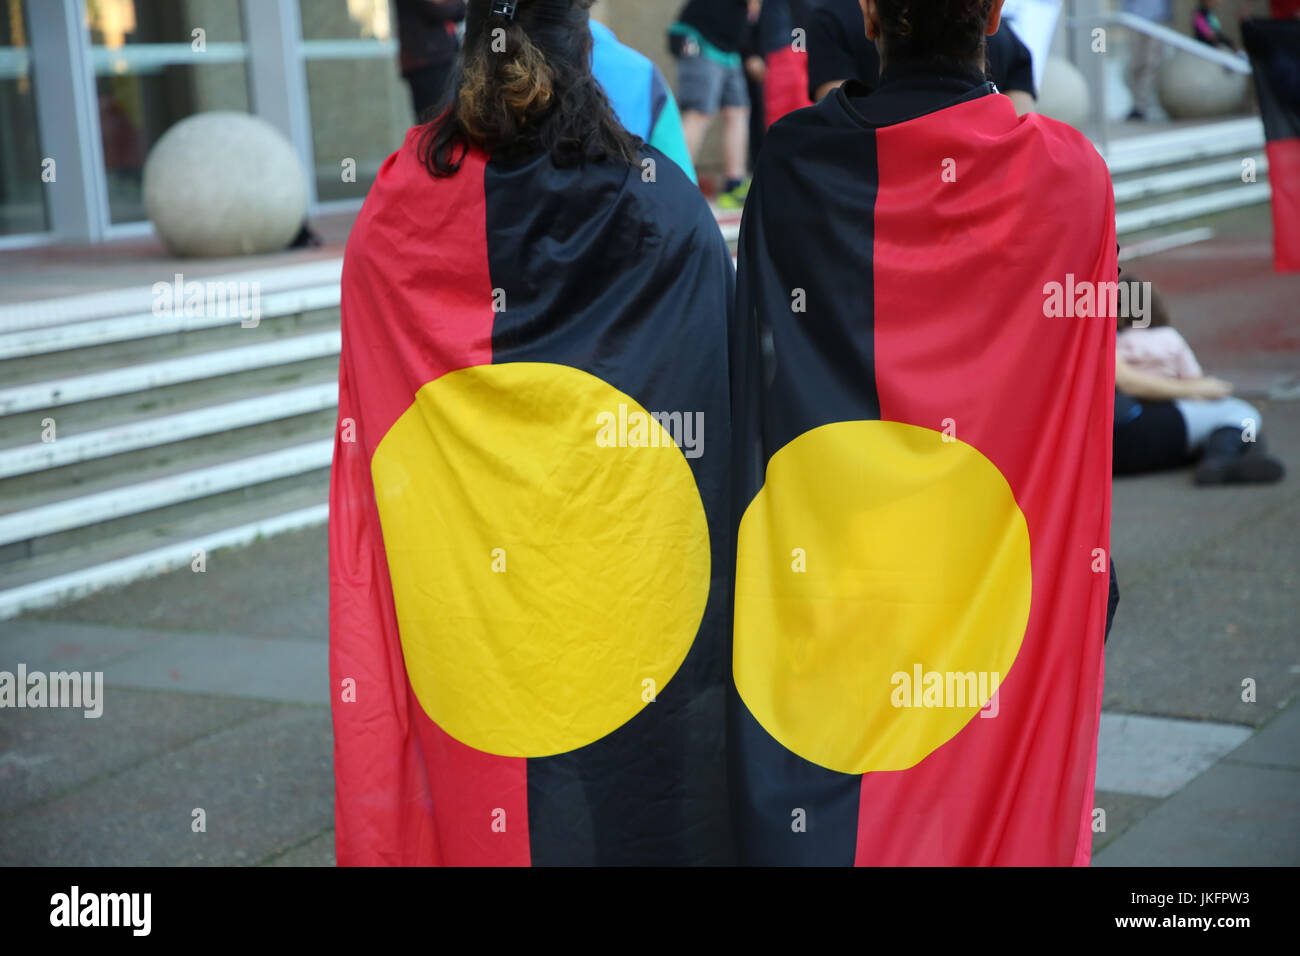 Sydney, Australia. 24 July 2017. Protesters rallied outside the Supreme Court of NSW in Sydney following the court verdict in the case of 14-year old Aboriginal boy, Elijah Doughty who was killed on 29 August 2016 in Kalgoorlie, Western Australia. A 56-year old man who had pursued Elijah, who was riding a dirt bike that some believe to have been stolen from the man the day before, but which supporters believe belonged to Elijah, was found not guilty of the charge of manslaughter but guilty of the lesser charge of dangerous driving occasioning death. Credit: Richard Milnes/Alamy Live News Stock Photo